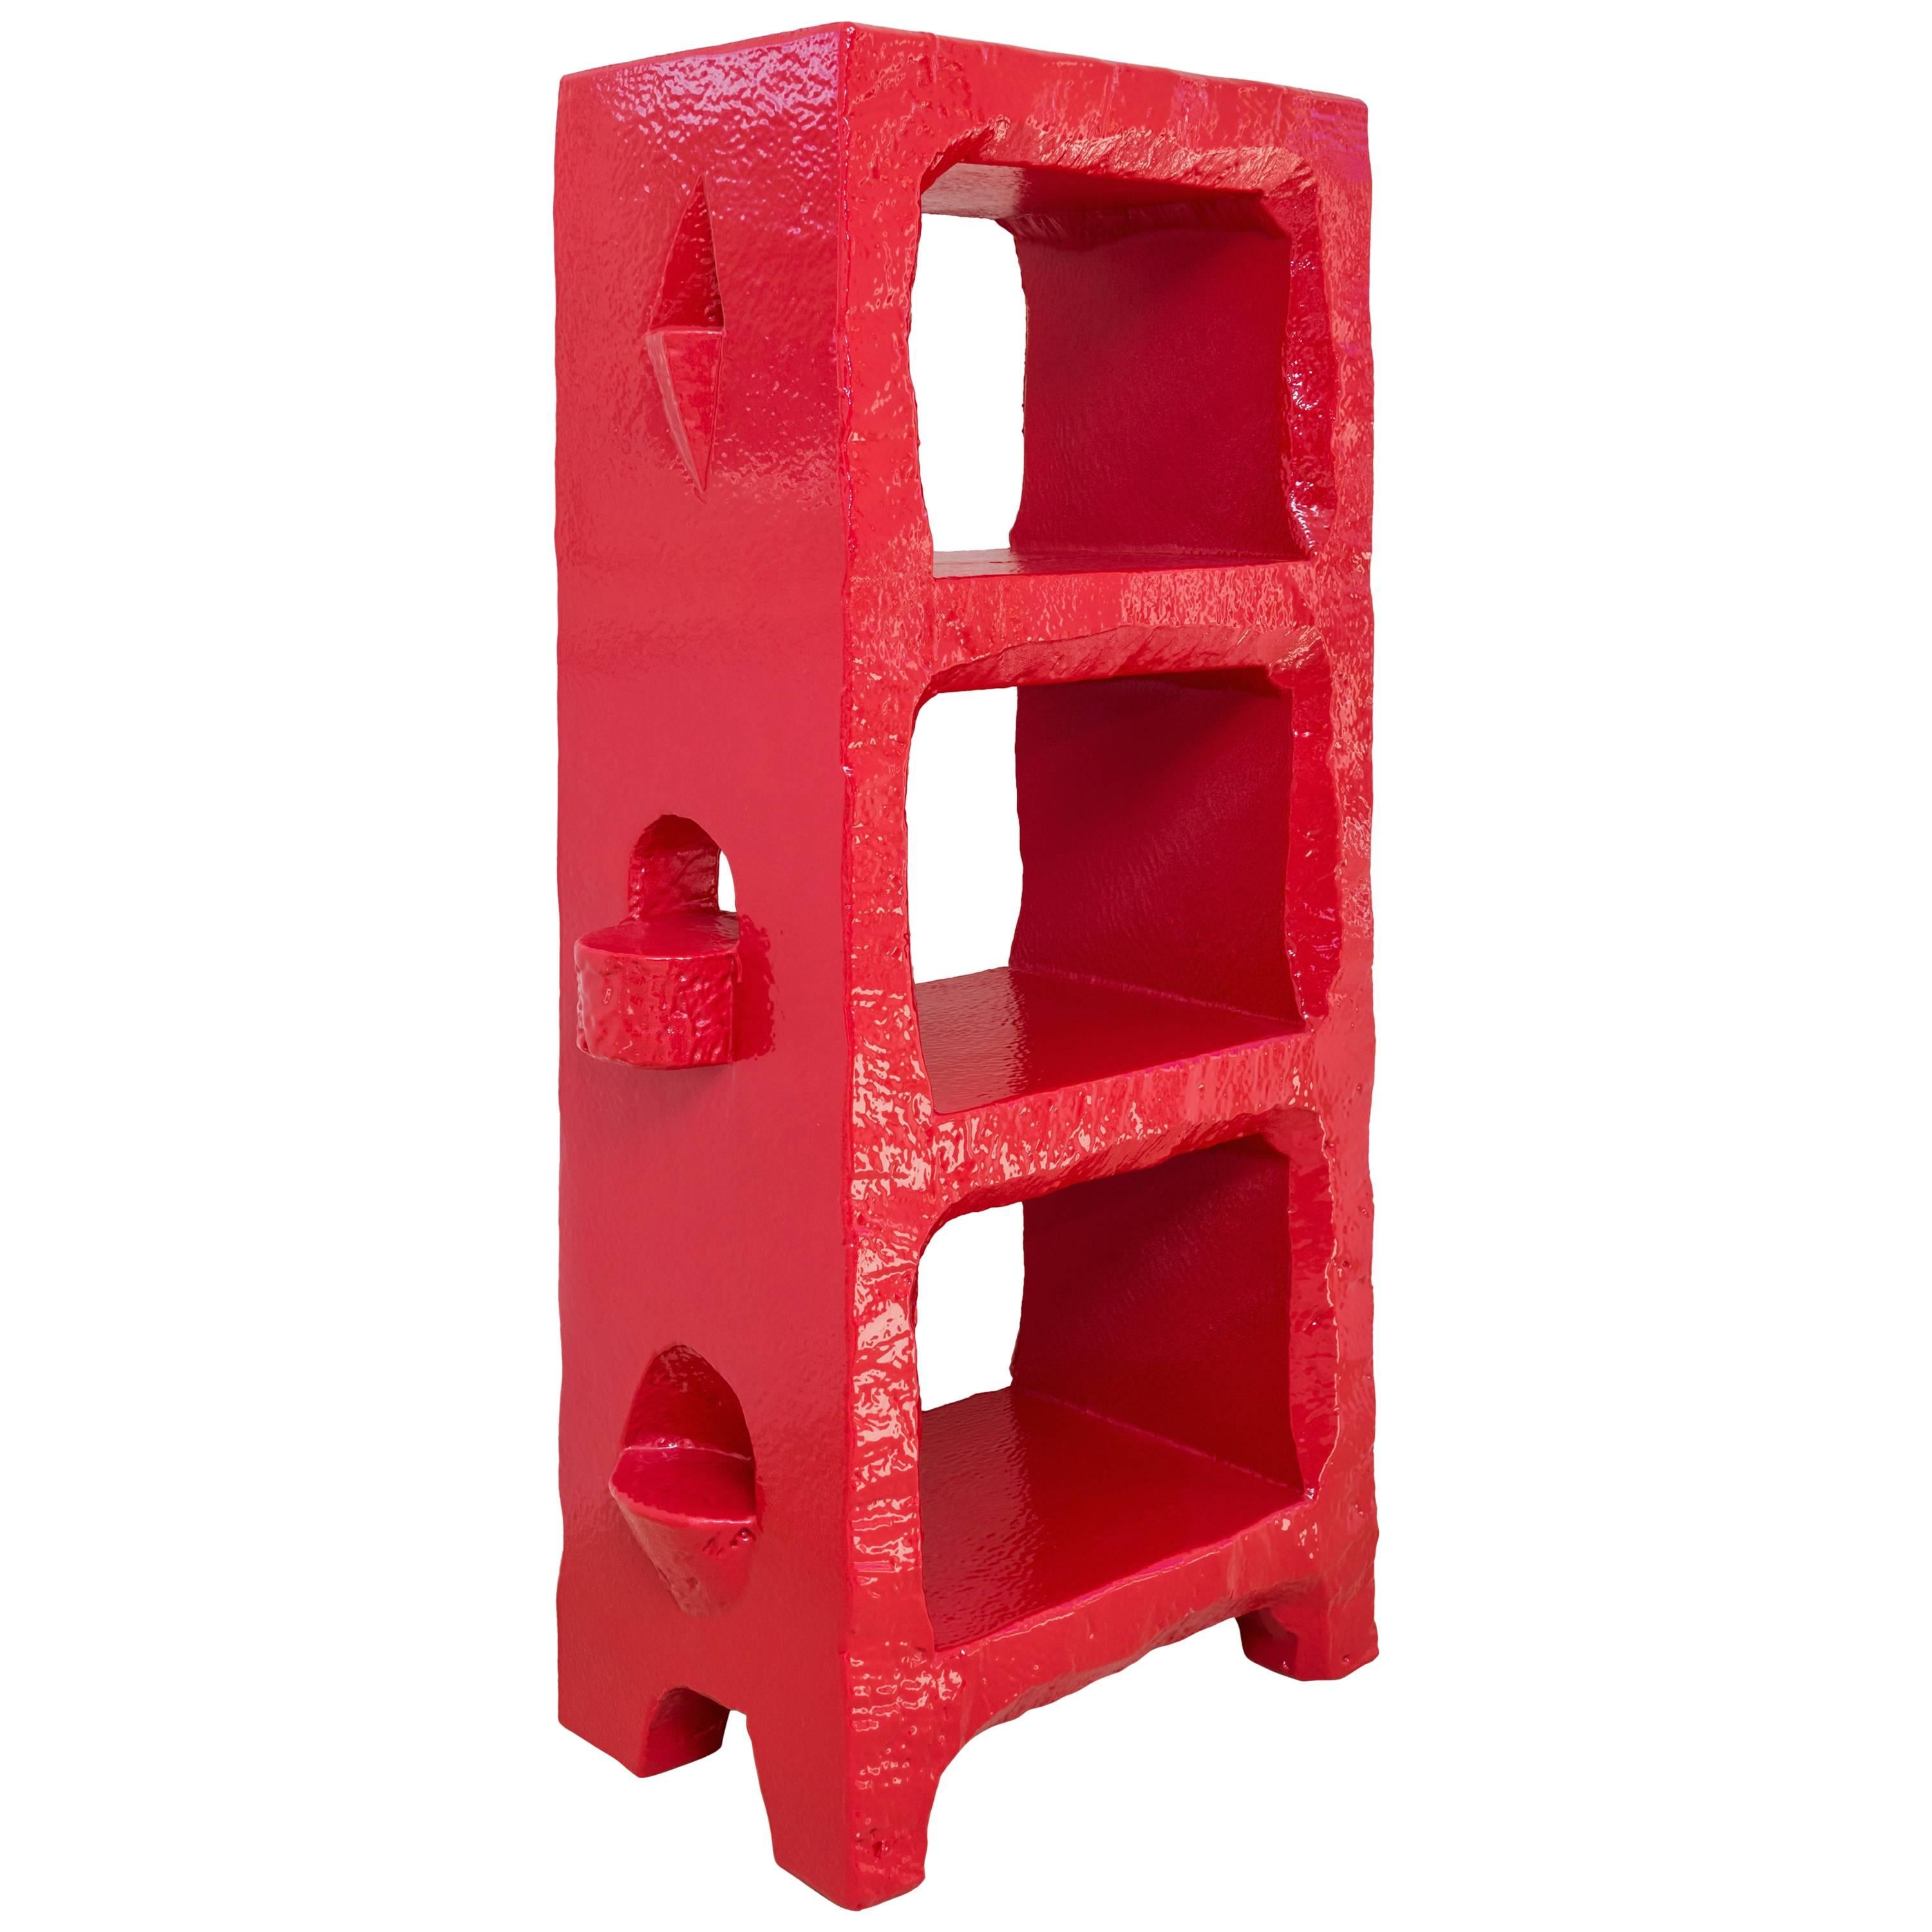 Red Poly Bookcase, Max Lamb, 2016 For Sale